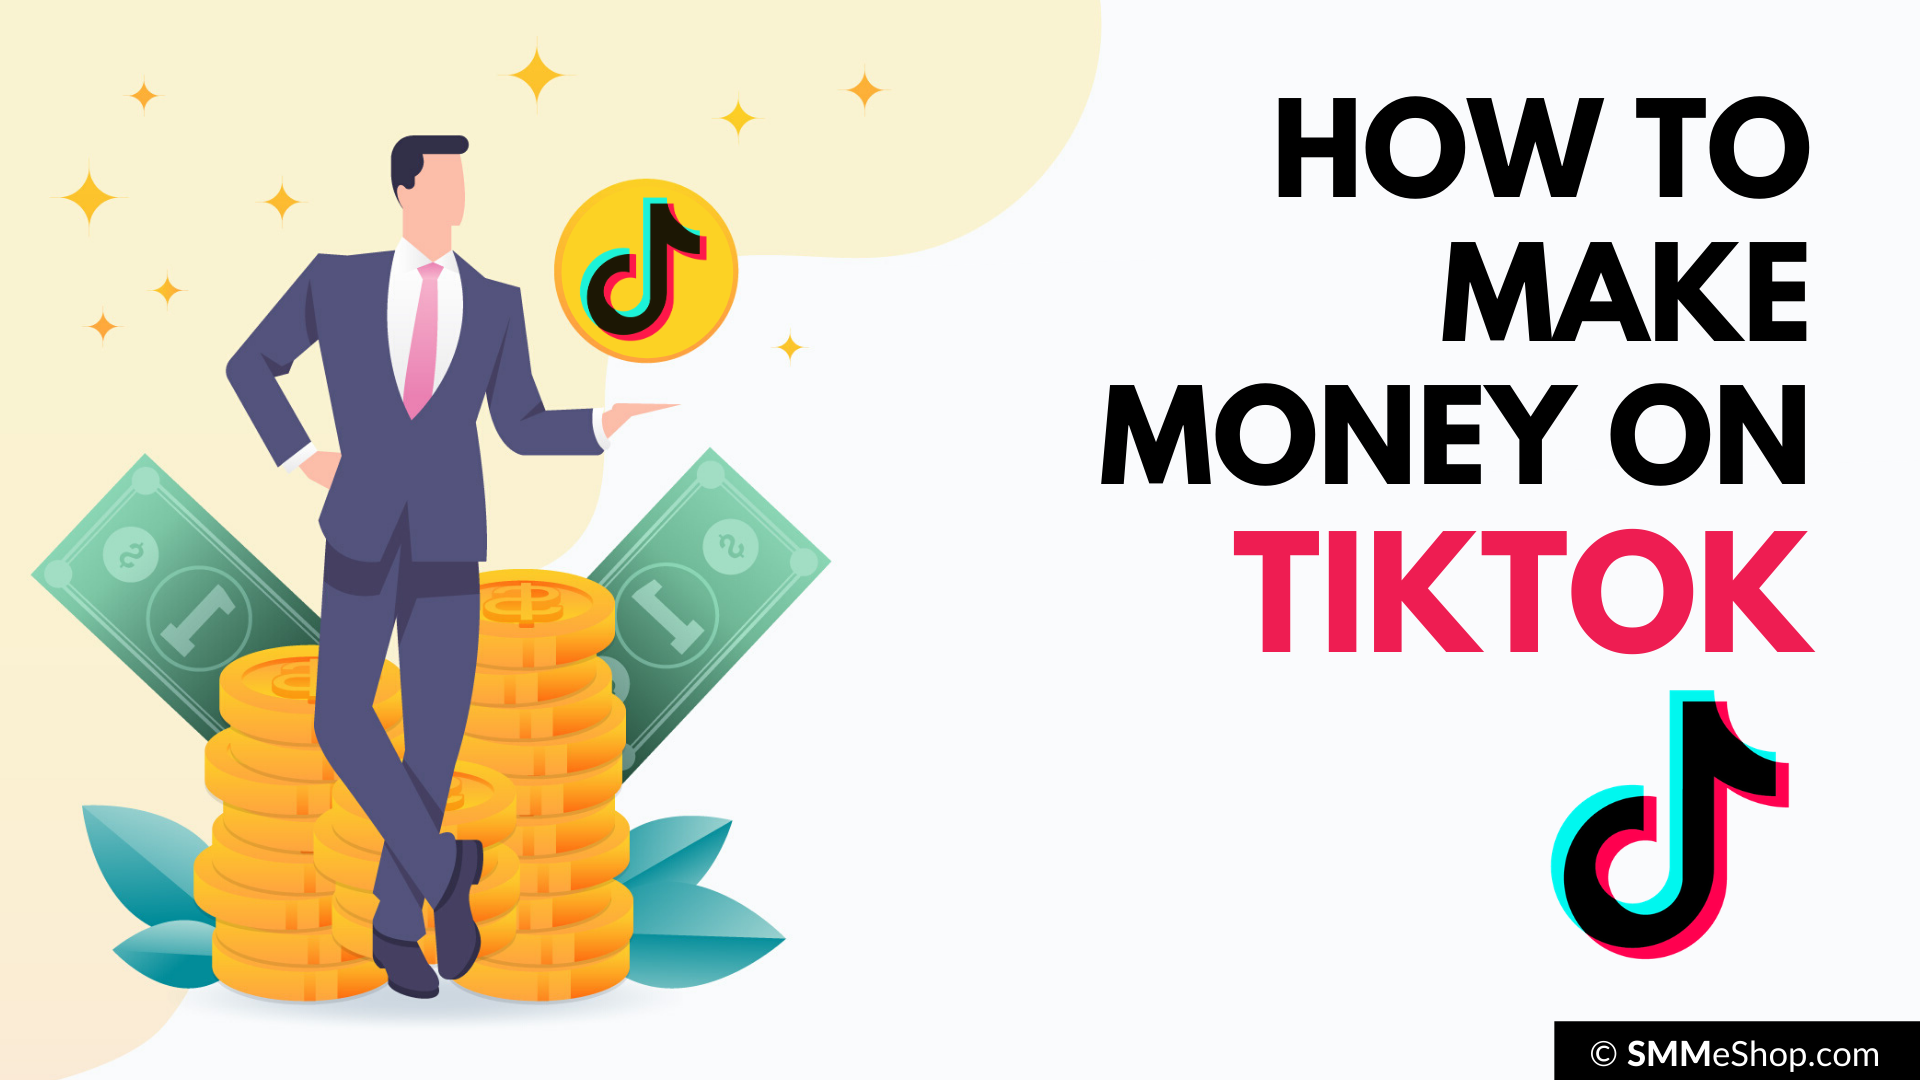 How to Make Money on TikTok by Watching Videos with Pinterest